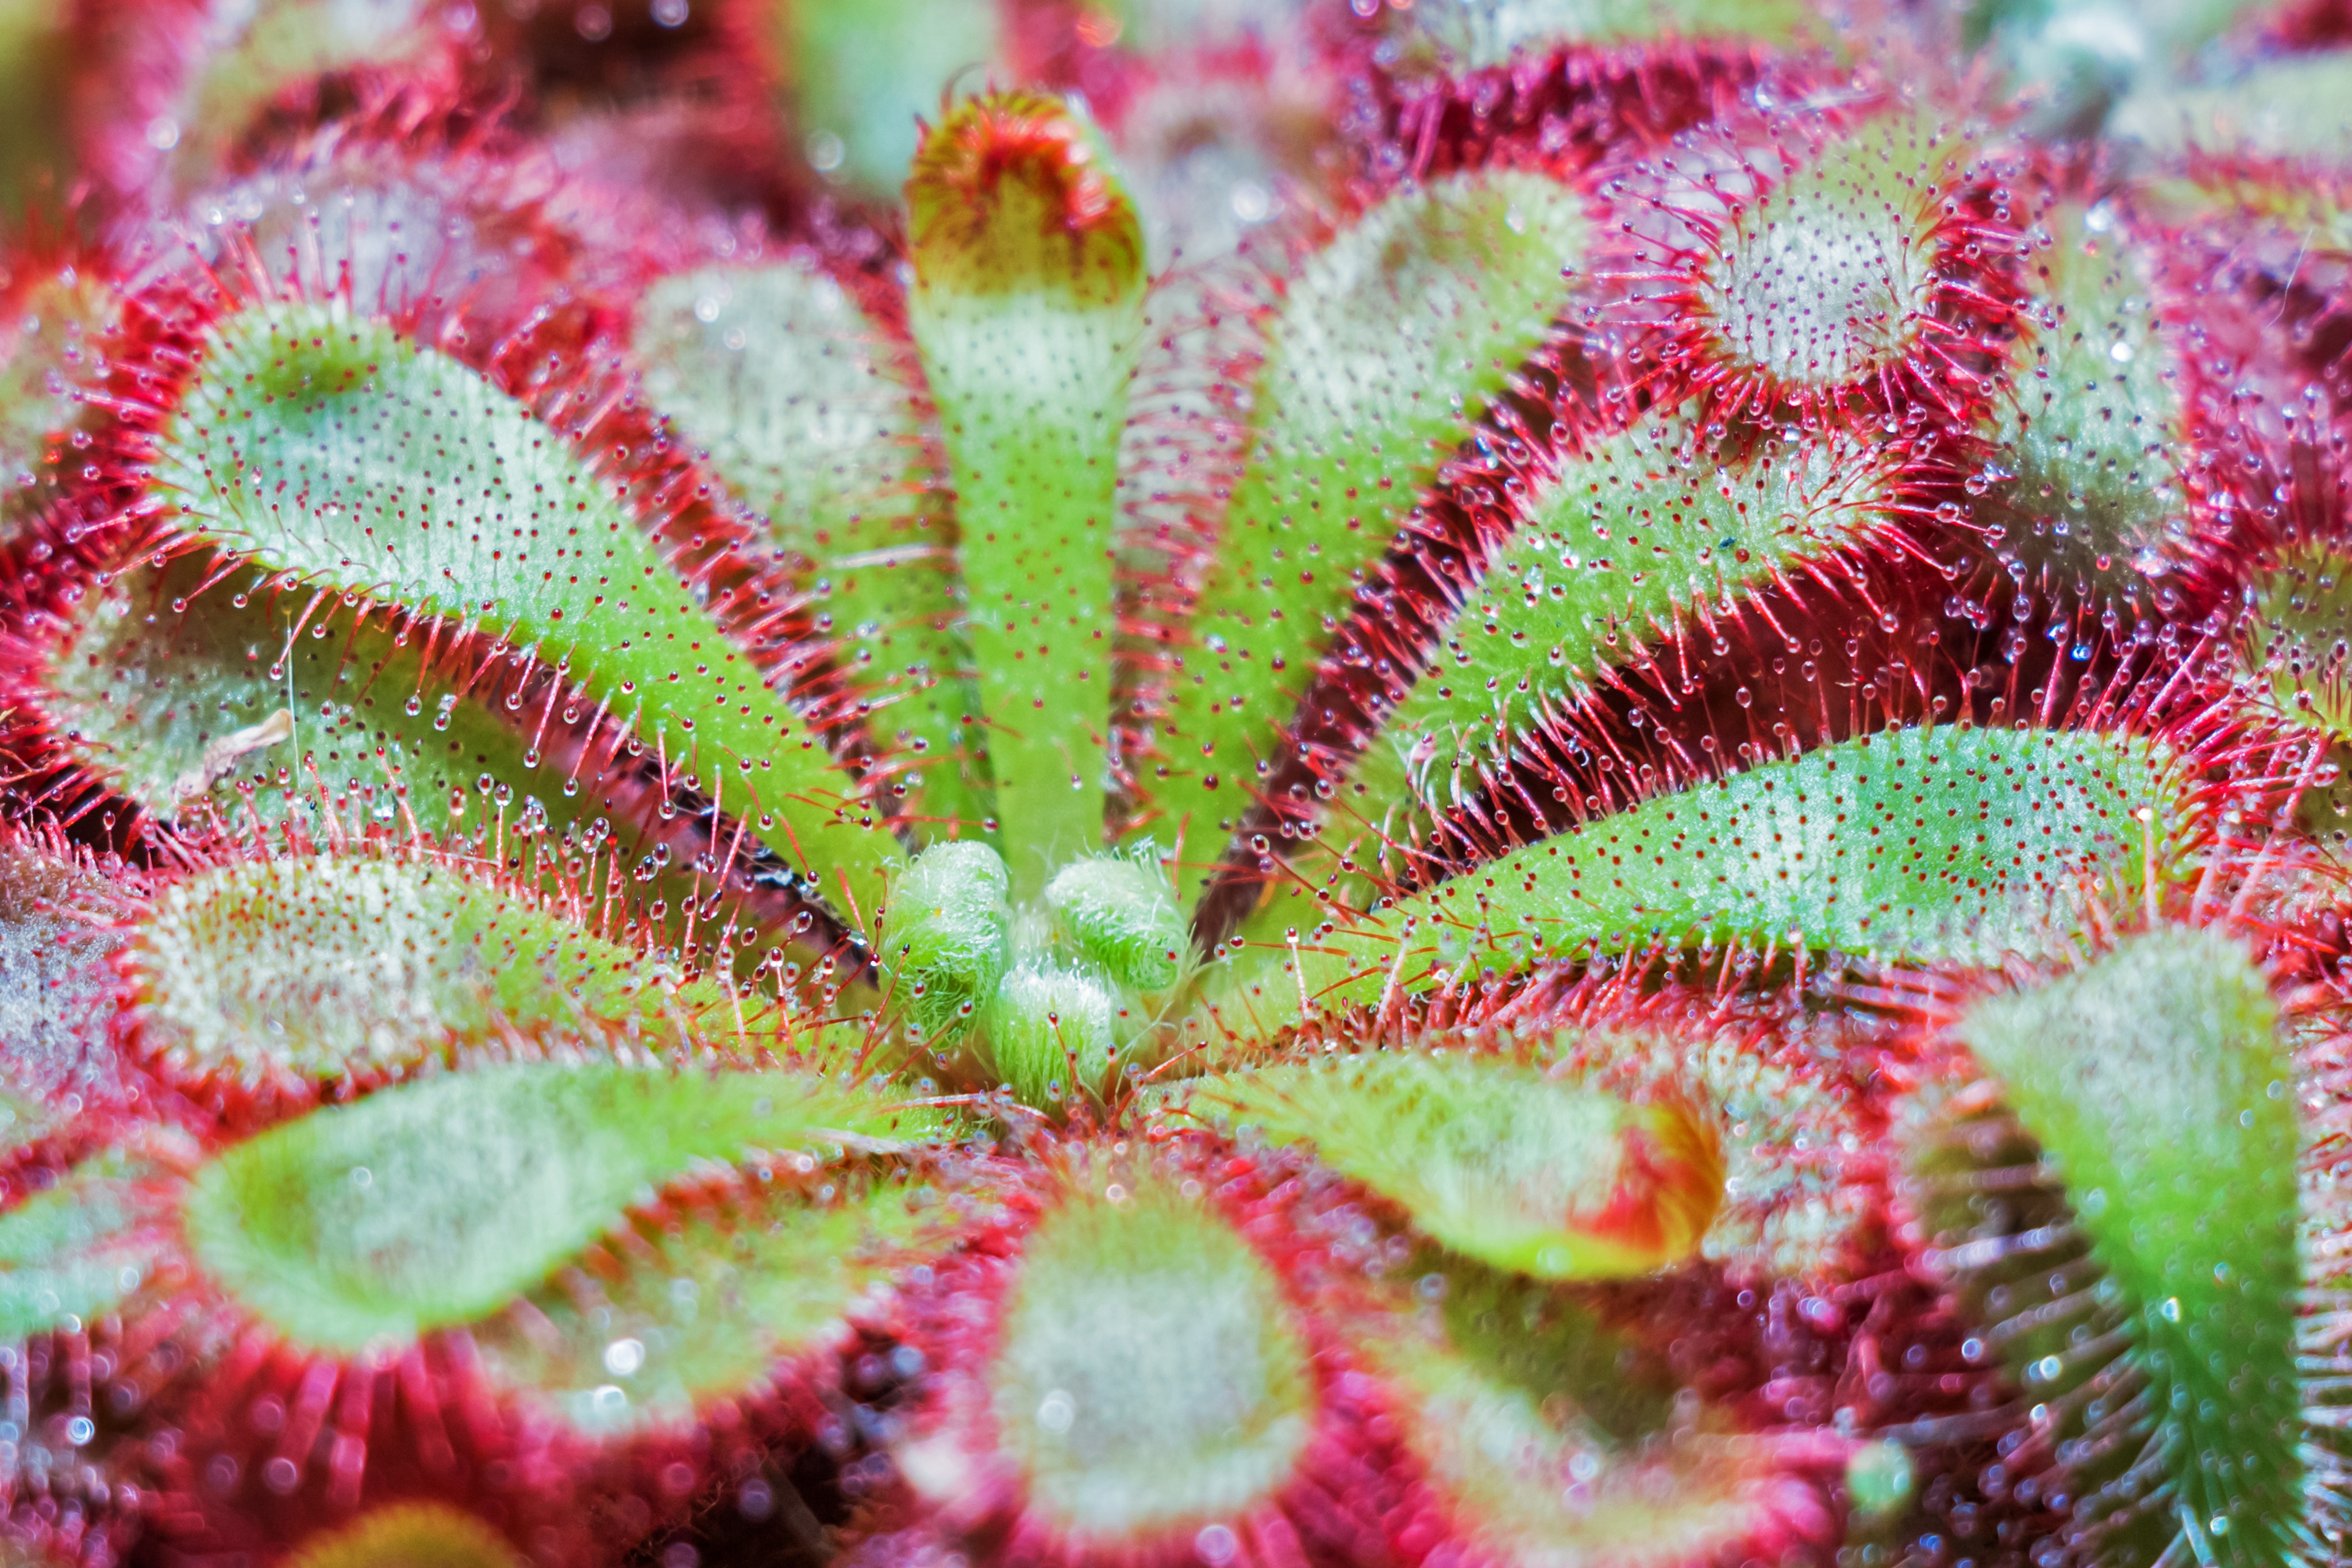 117752 download wallpaper plant, macro, surface, drosera spatulata screensavers and pictures for free